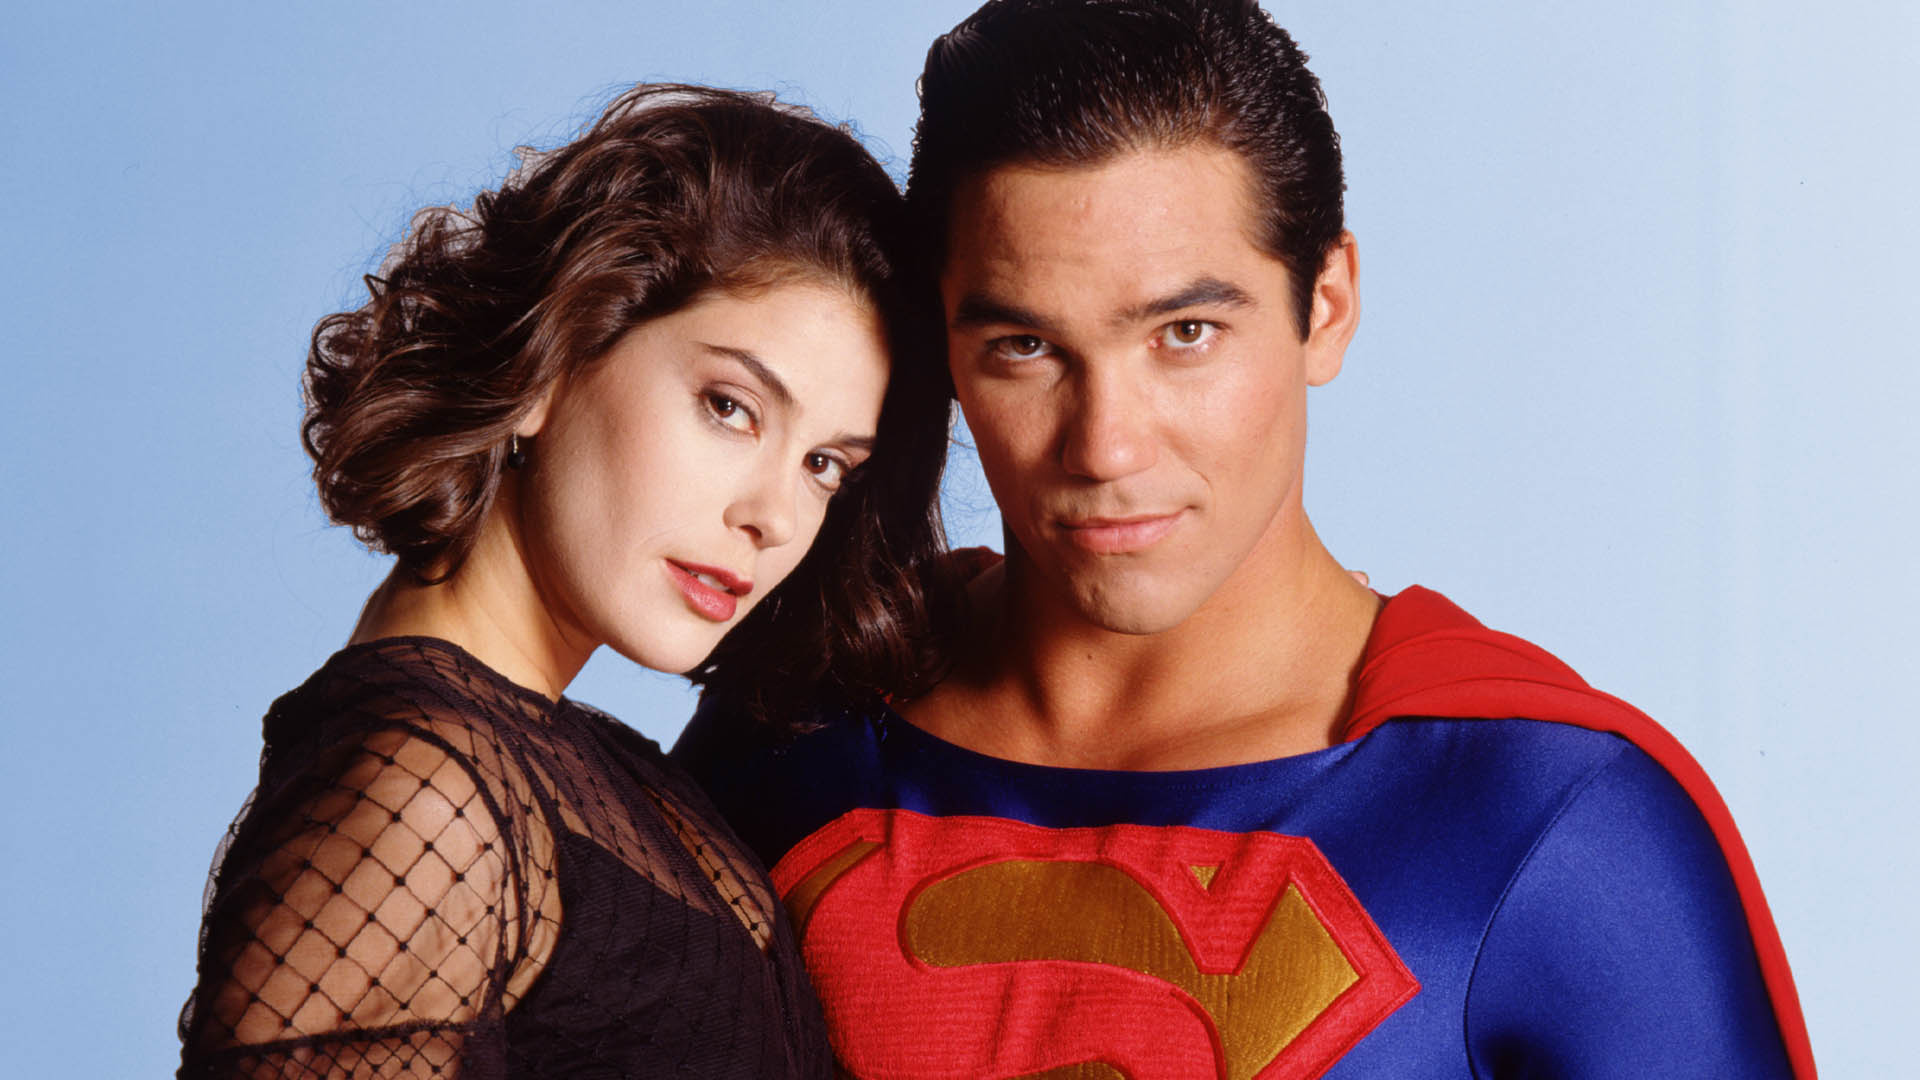 Lois and Clark: The New Adventures of Superman: Dean Cain and Teri Hatcher, The only actors to appear in all 87 episodes of the series. 1920x1080 Full HD Wallpaper.